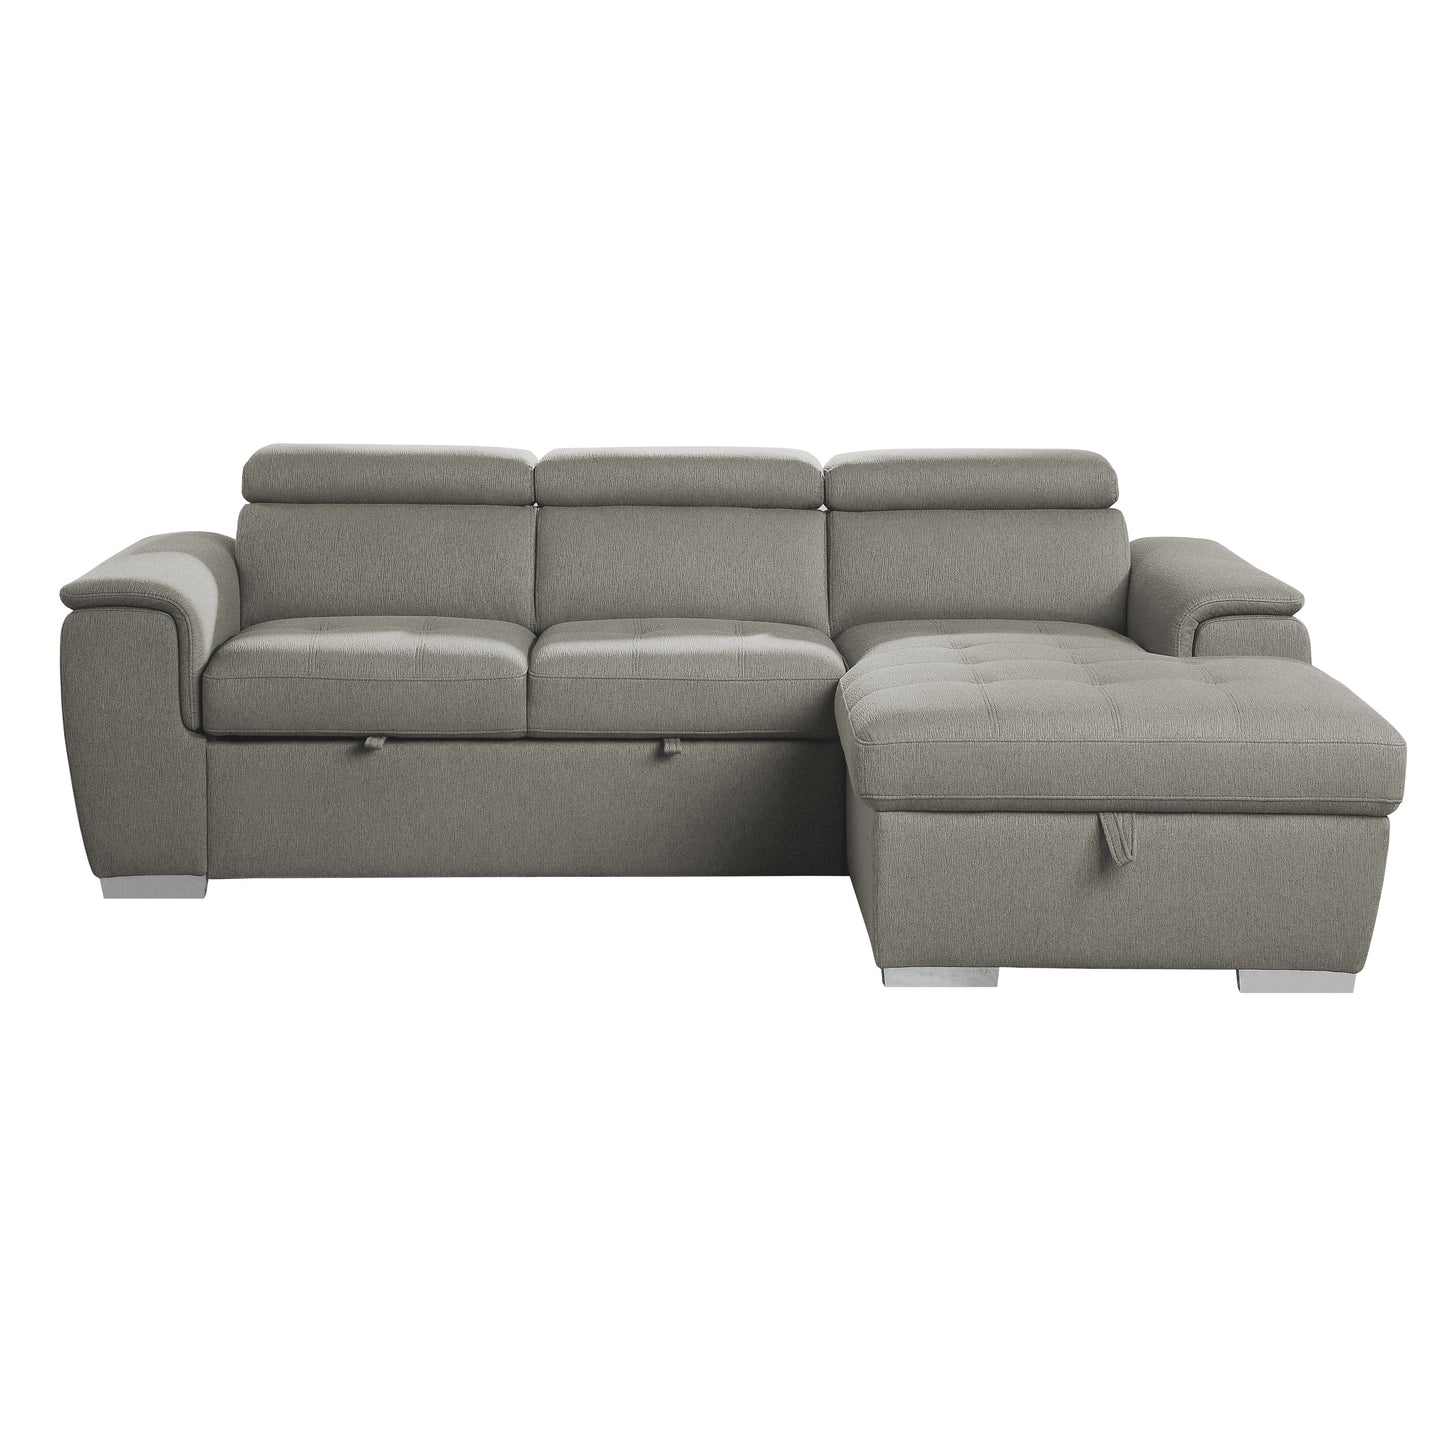 Berel 2-Pcs Sectional w/ Adj. Headrests, Pull-out Bed & Right Chaise w/Hidden Storage BROWN